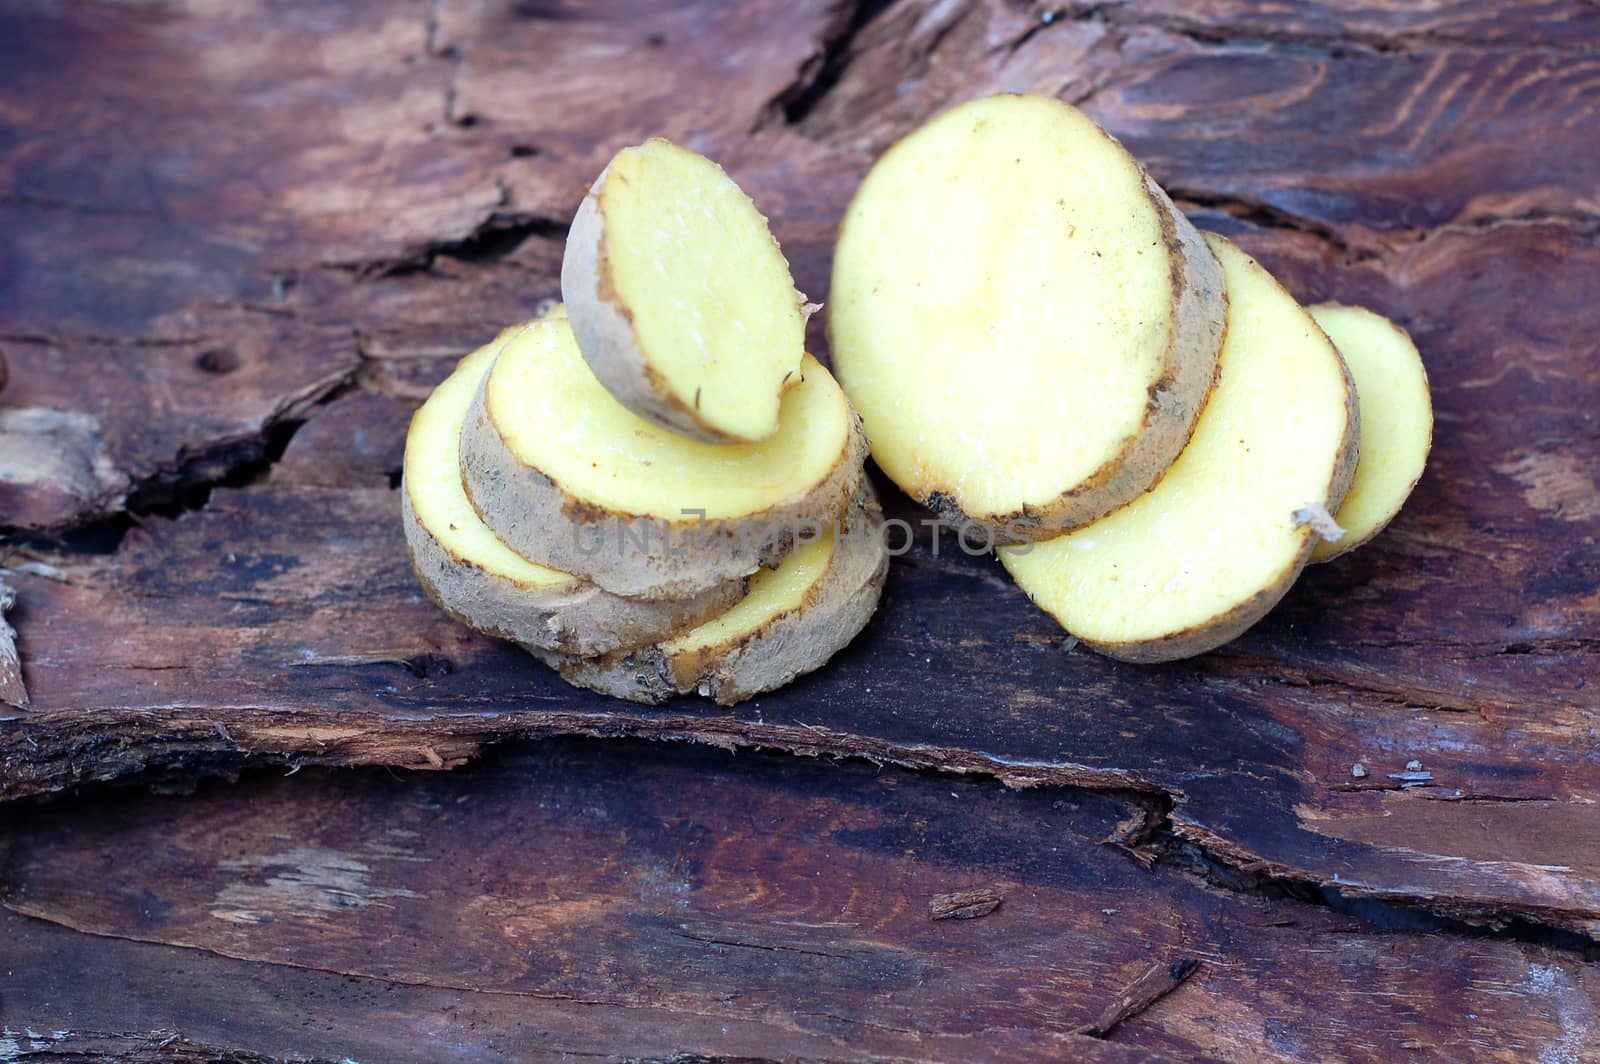 picture of a Sliced potatoes on dark wood background